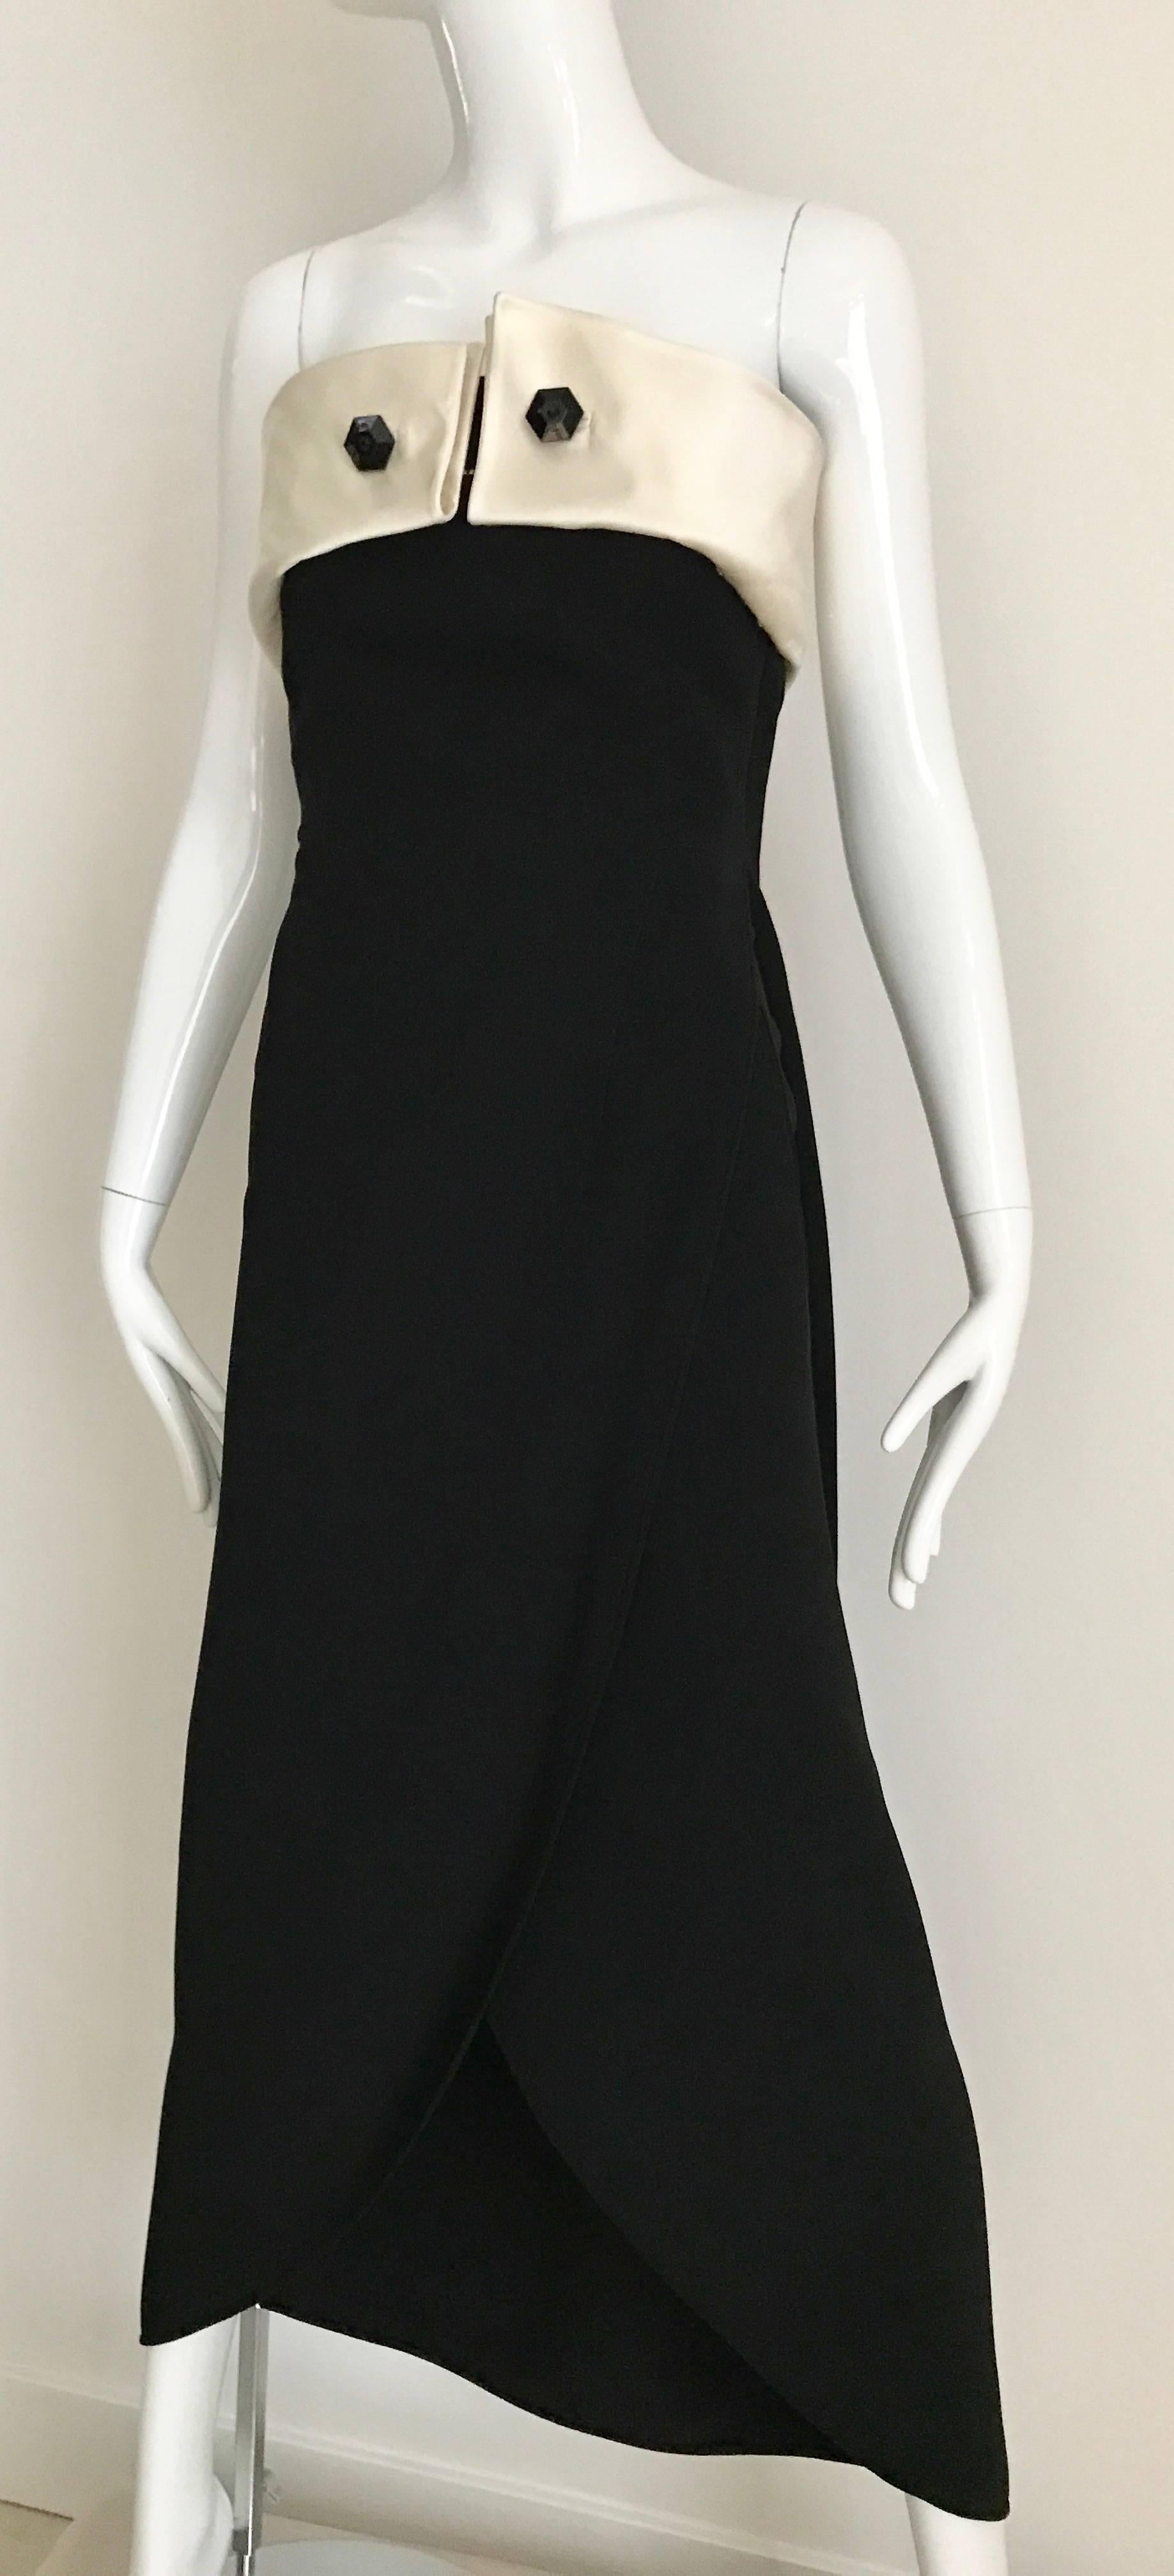 Modern and Chic Vintage 90s Giorgio Armani Strapless Black dress with Creme Silk satin origami pleat bust. 2 Silk fold connected with black lacquer cufflink rhinestones chain. Dress has pockets and bustier zipper inside.
Perfect Gown for black tie